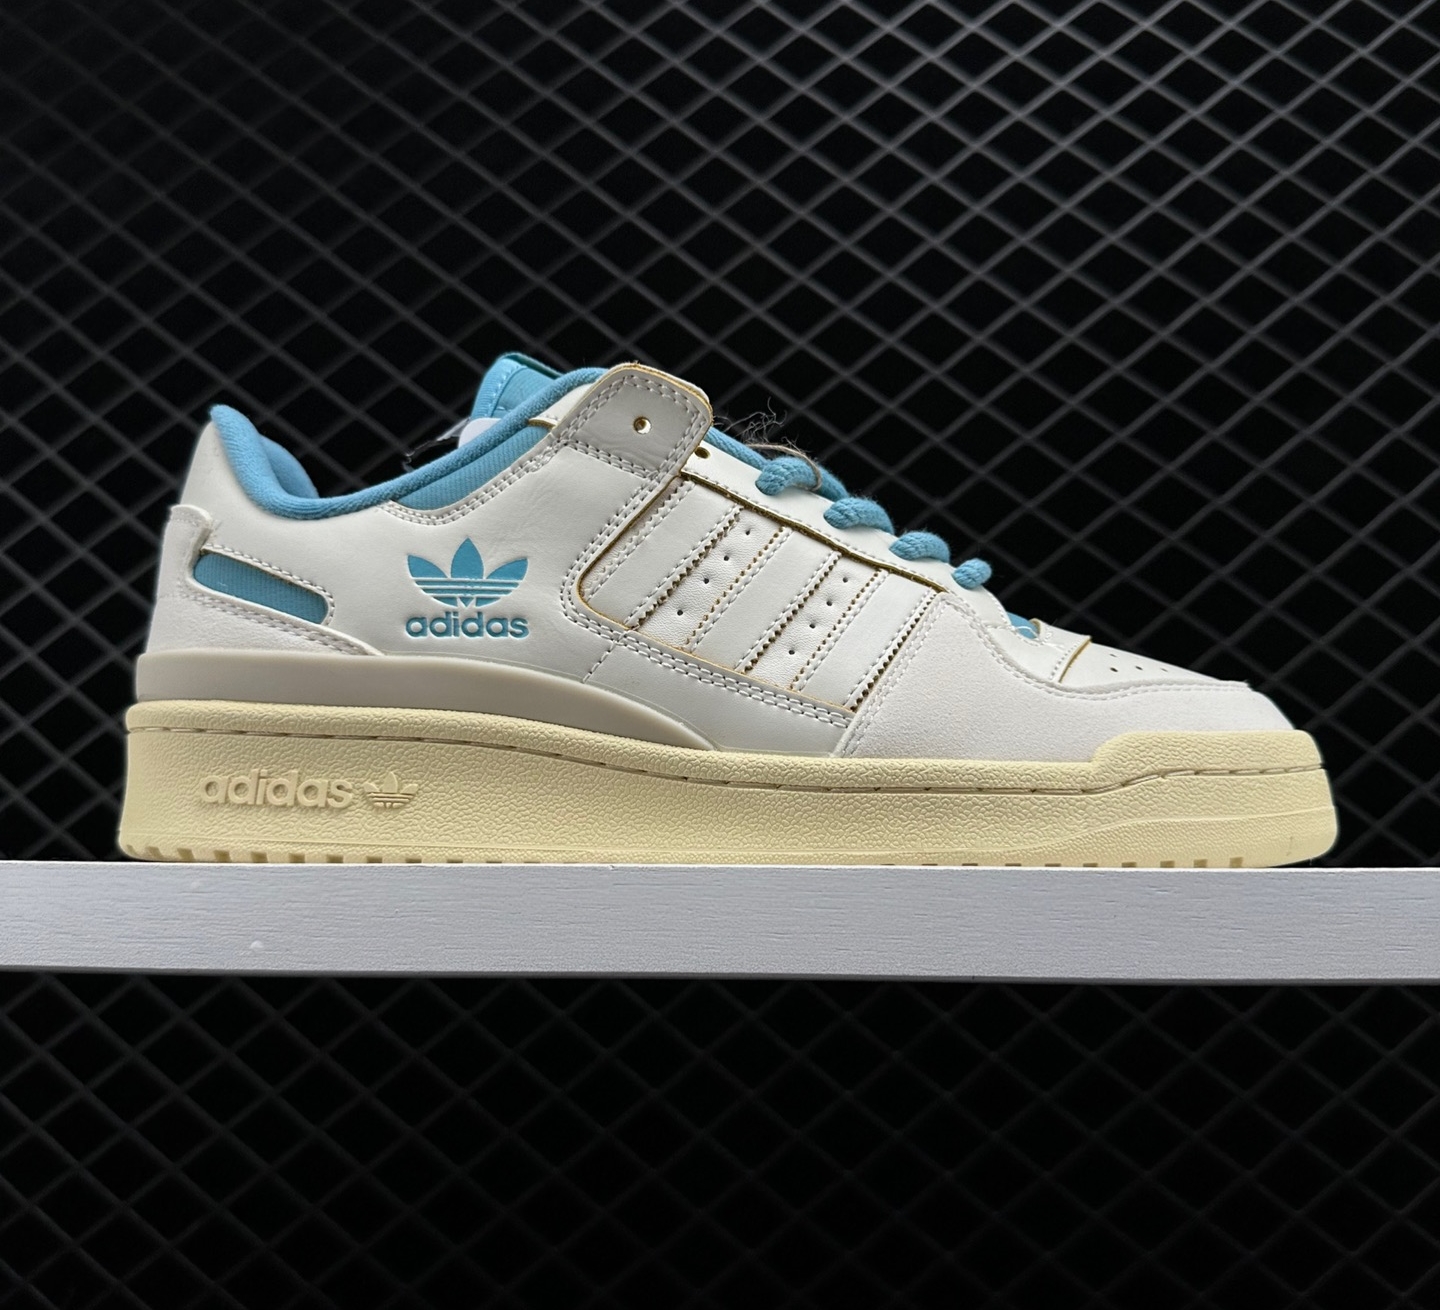 Adidas Originals Forum 84 Low CL 'Off White' - Limited Edition